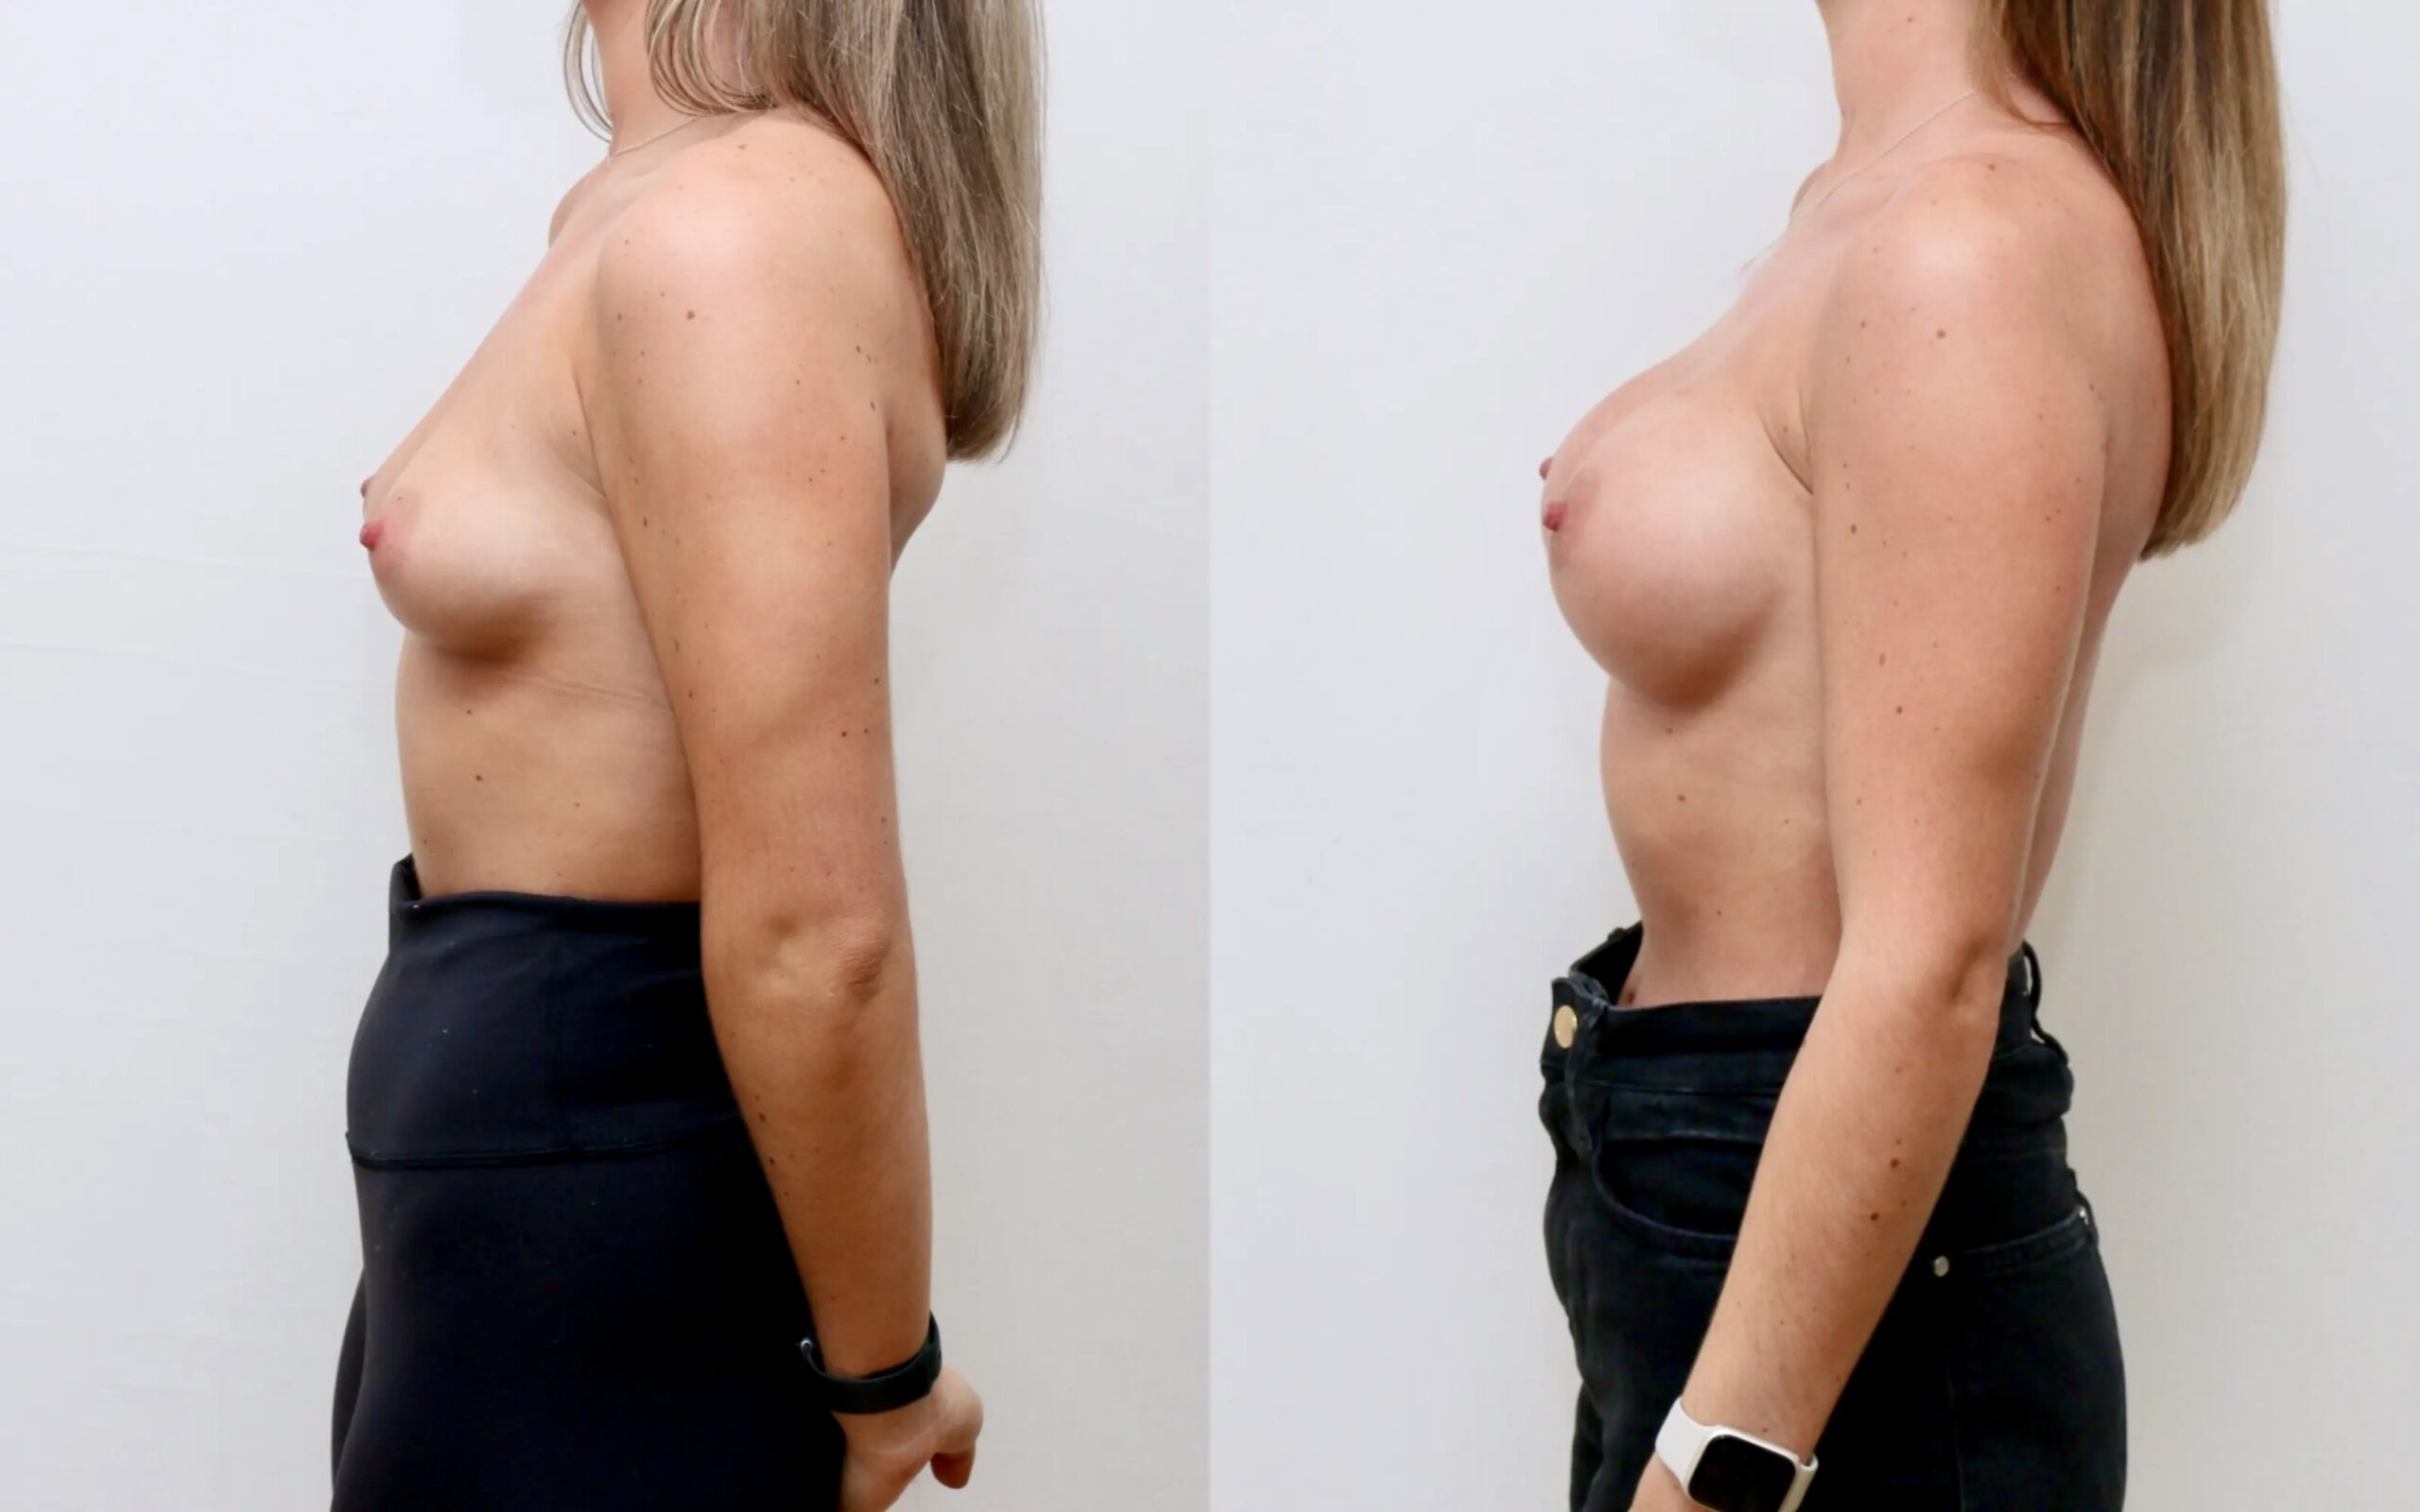 Breast augmentation before and afters